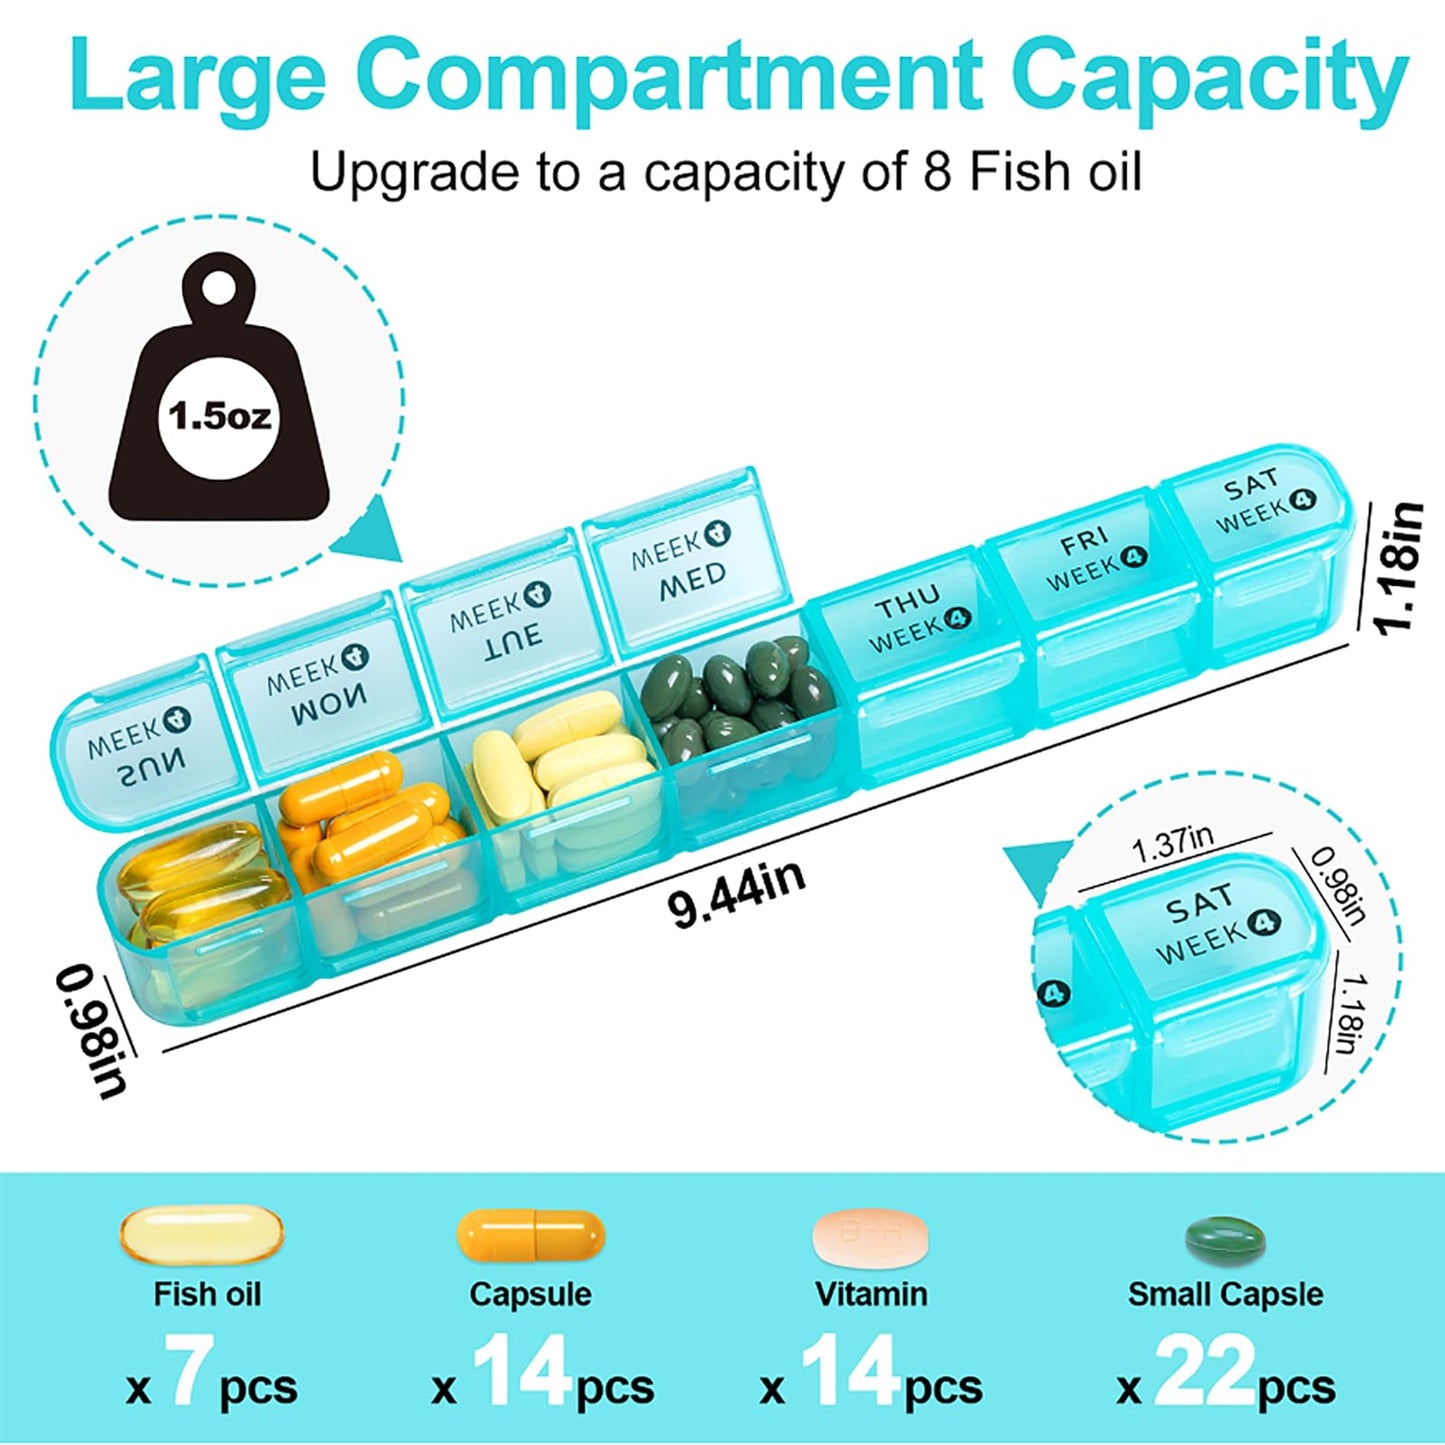 Monthly Pill Organizer 1 Times a Day,Daviky 4 Weekly Pill Organizer,Monthly Pill Box 1 Times a Day Organizer,28 Day Portable Pill Case Organizer,Medicine Organizer for Vitamins and Medication（Rainbow）